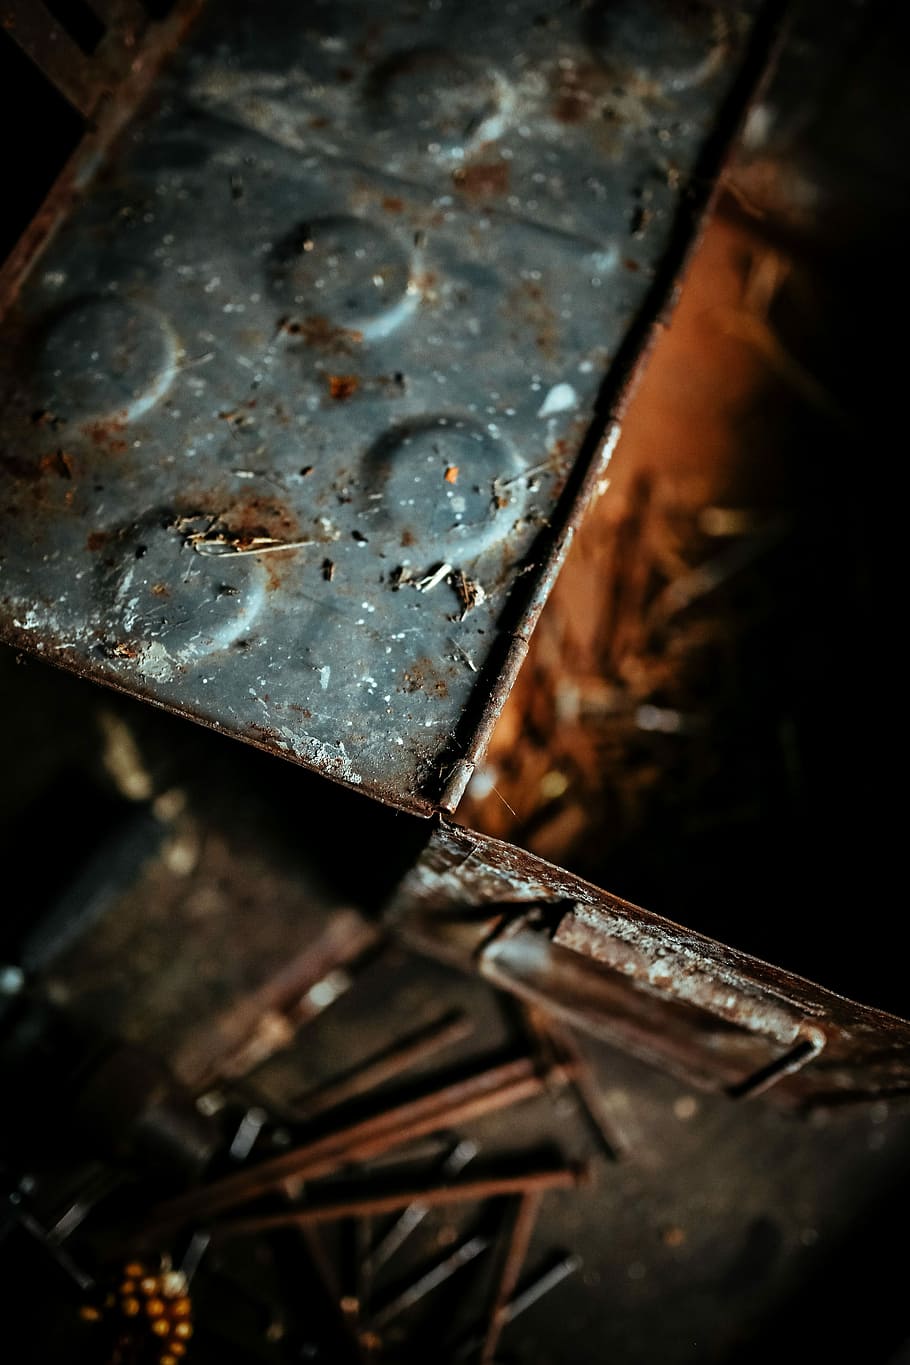 boxes, workshop, Old, nails, box, wooden, metal, garage, rusty, dust